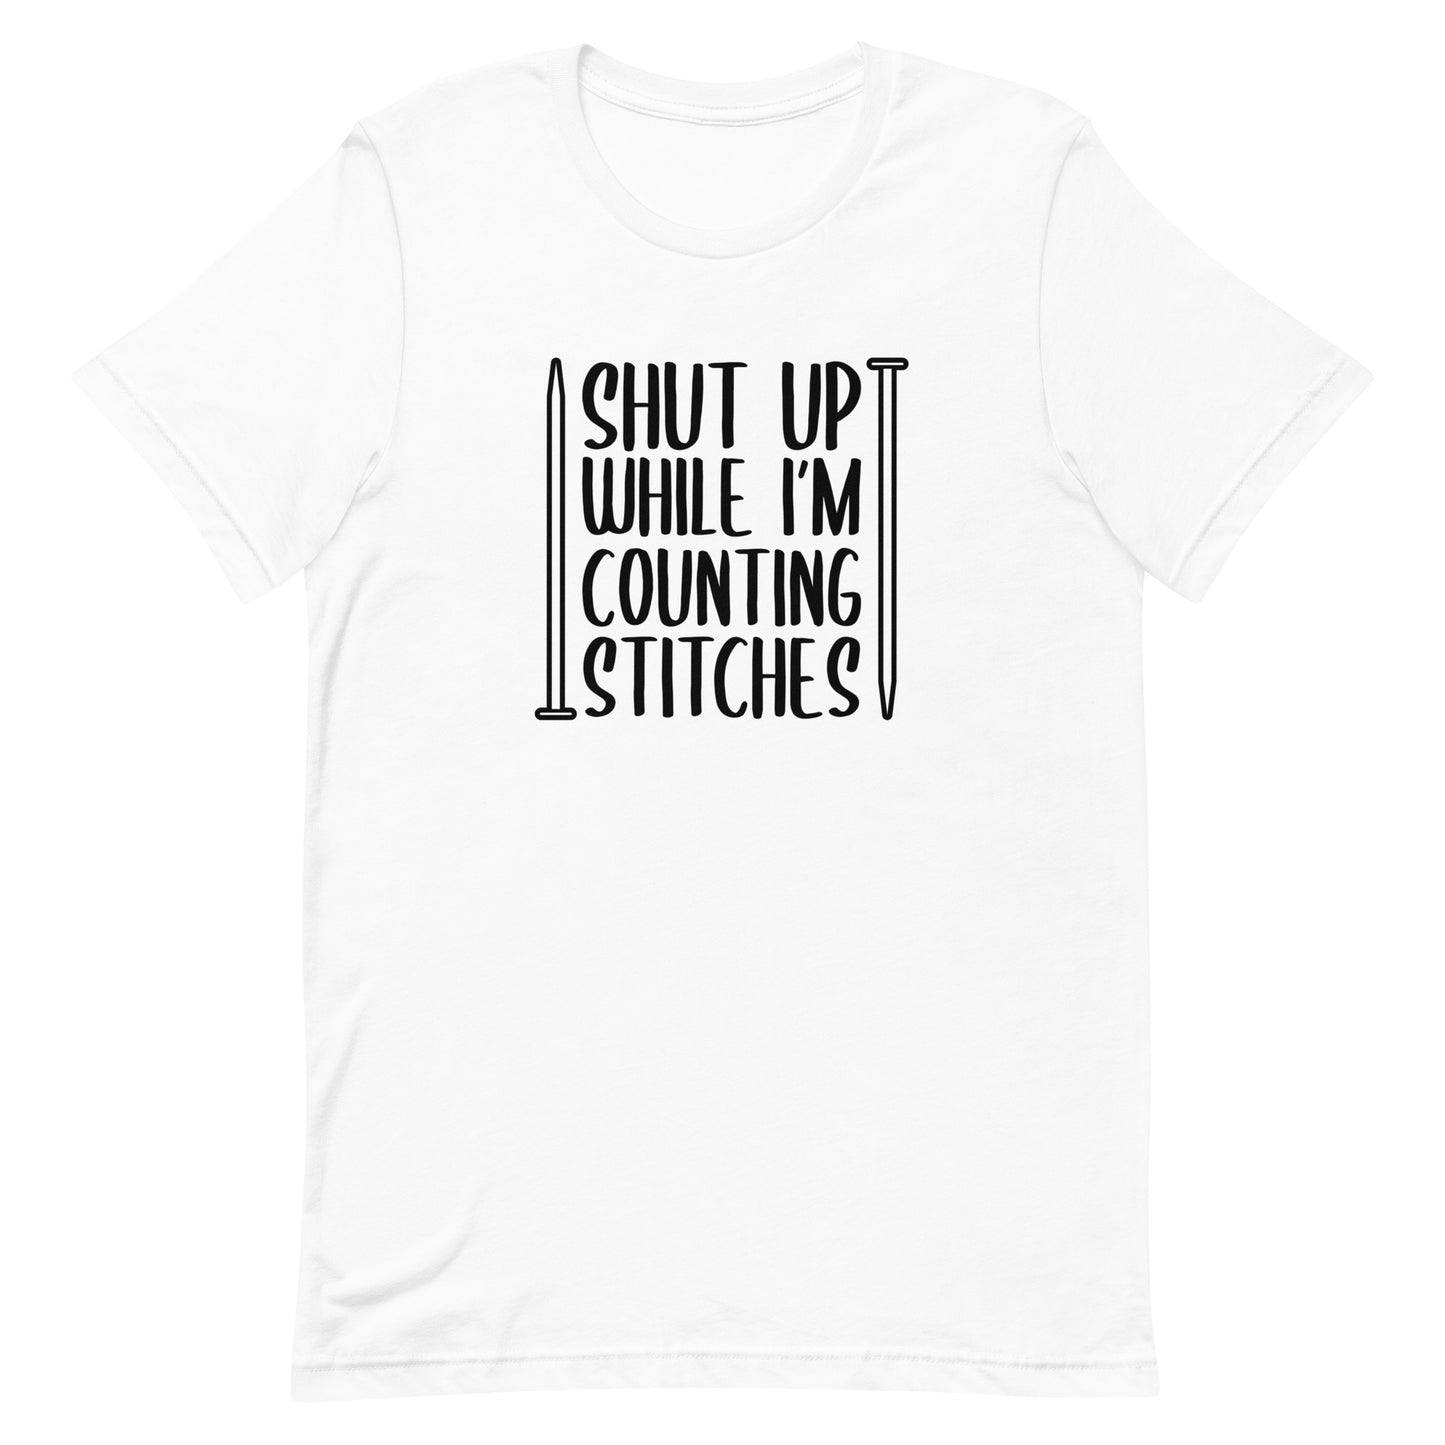 A white crewneck t-shirt with black text surrounded by two knitting needles. The text reads "Shut up while I'm counting stiches".